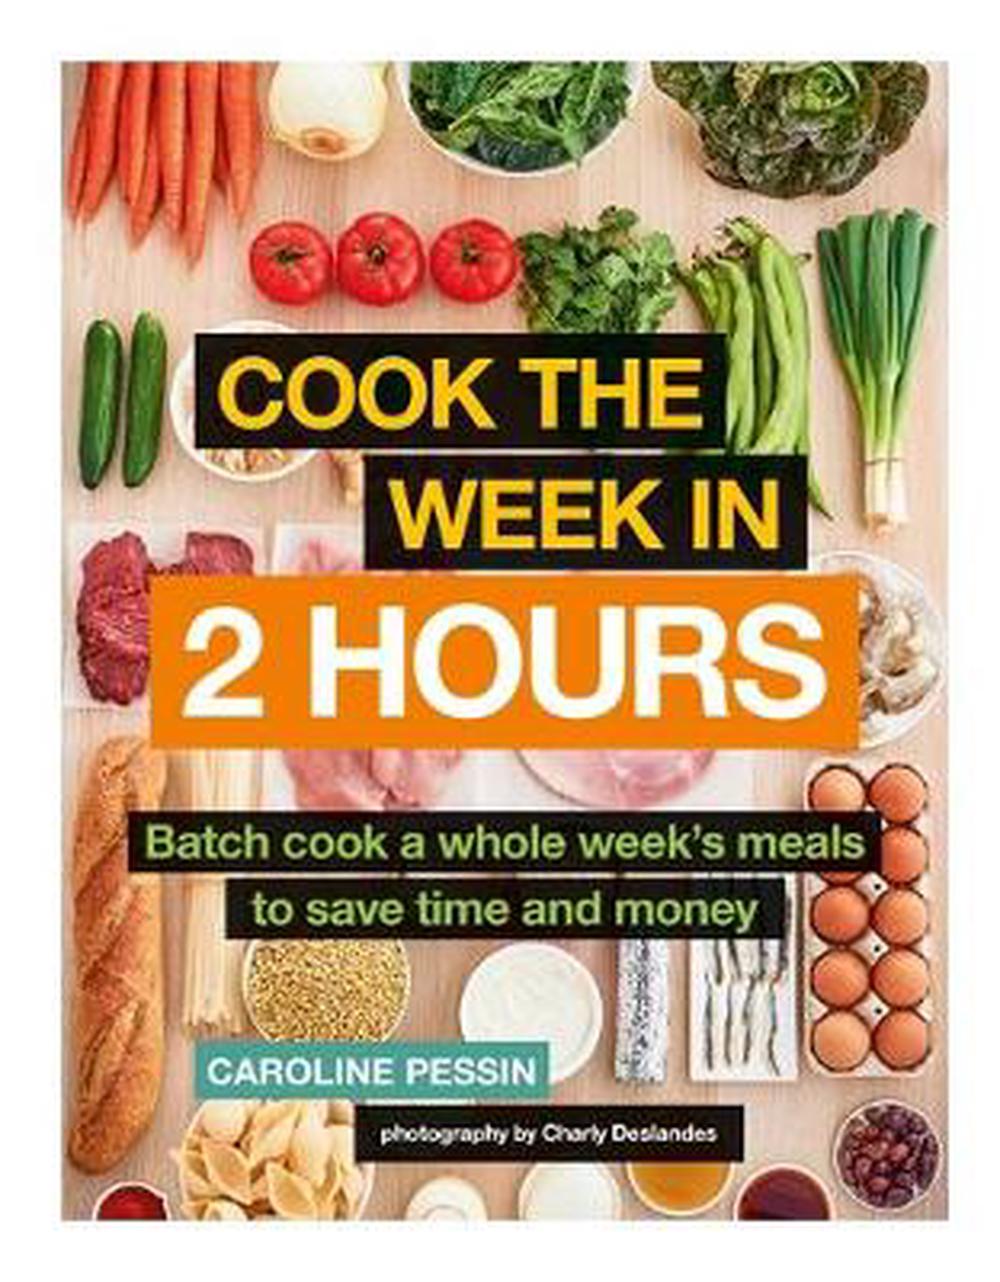 Cook The Week In 2 Hours Batch Cook A Whole Week S Meals To Save Time And Money 9780600636199